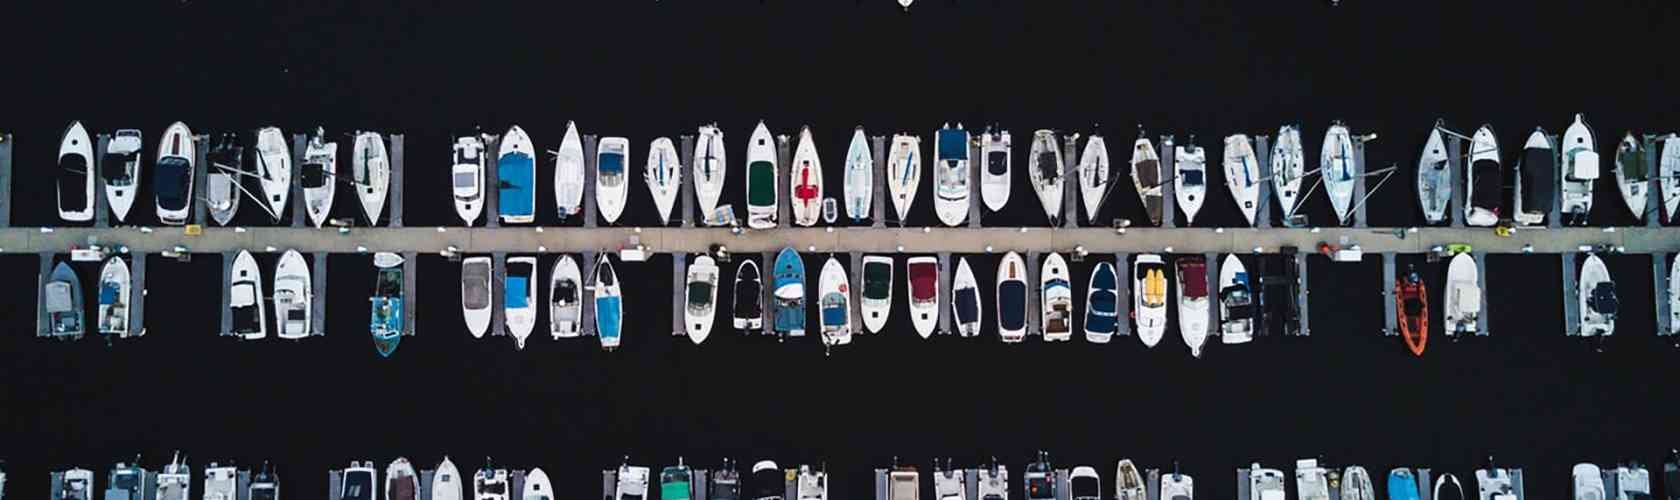 Rows of boats aerial view 3